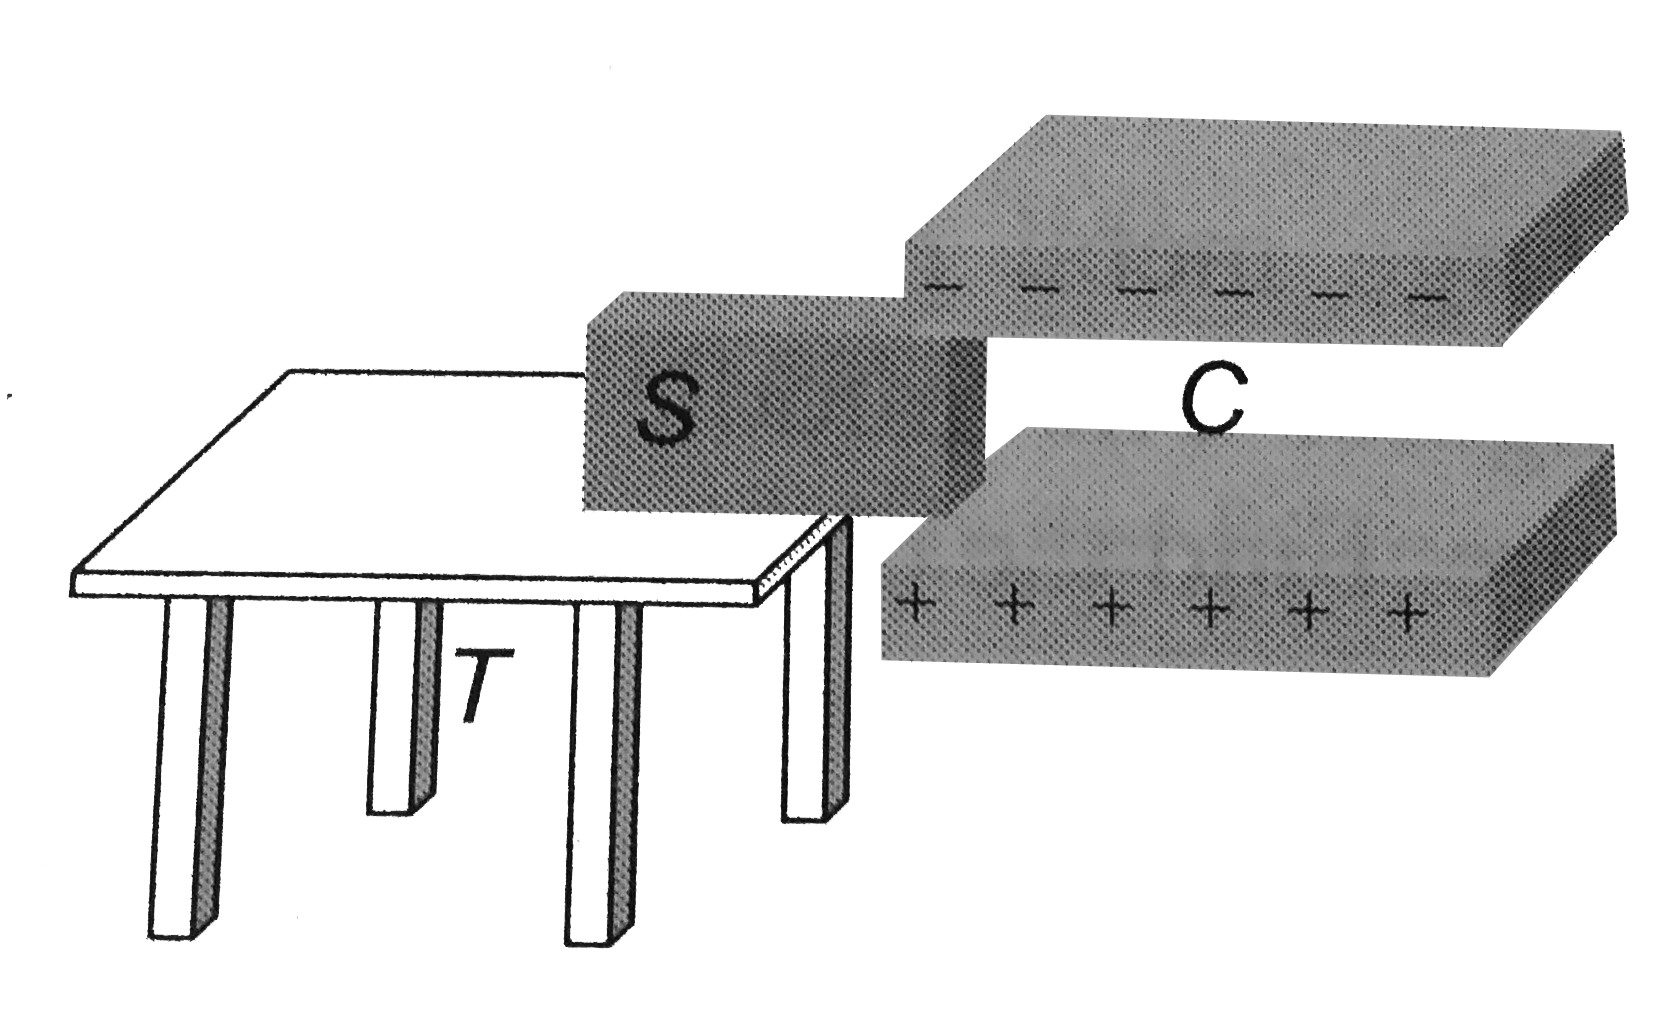 A frictionless dielectric plate S is kept on a frictionless table T. A charged parallel plate capacitance C (of which the plates are frictionless) is kept near it. The plate S is between the plates. When the plate S is left between the plates